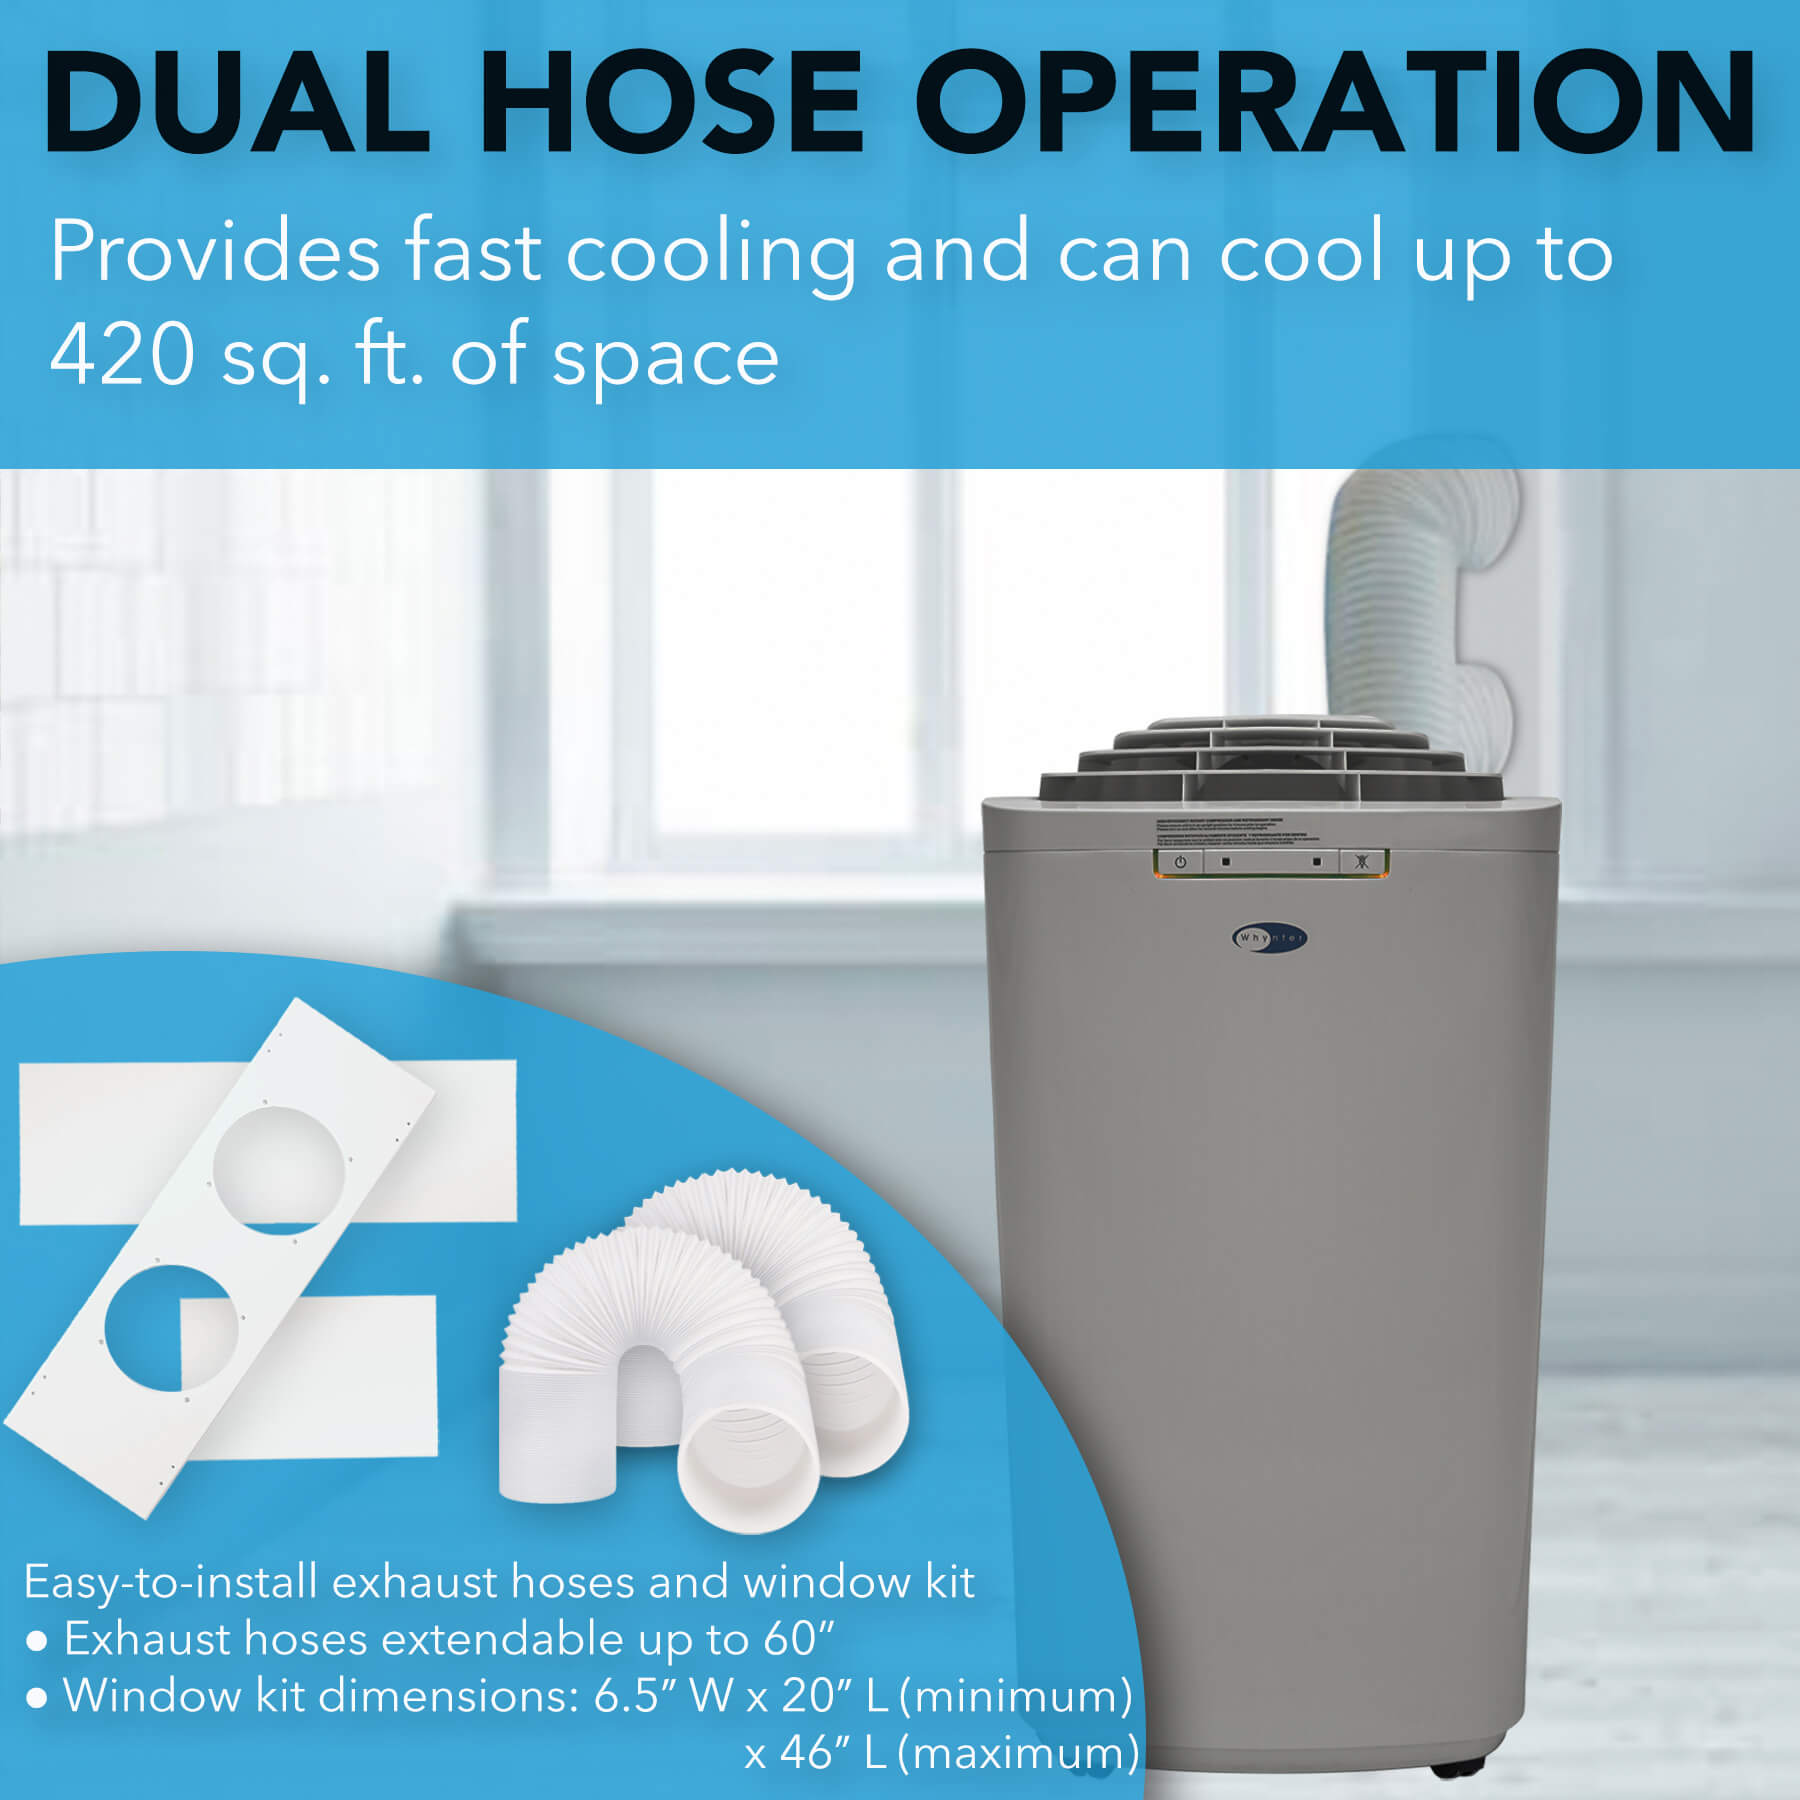 How to increase the efficiency of a single-hose home portable air